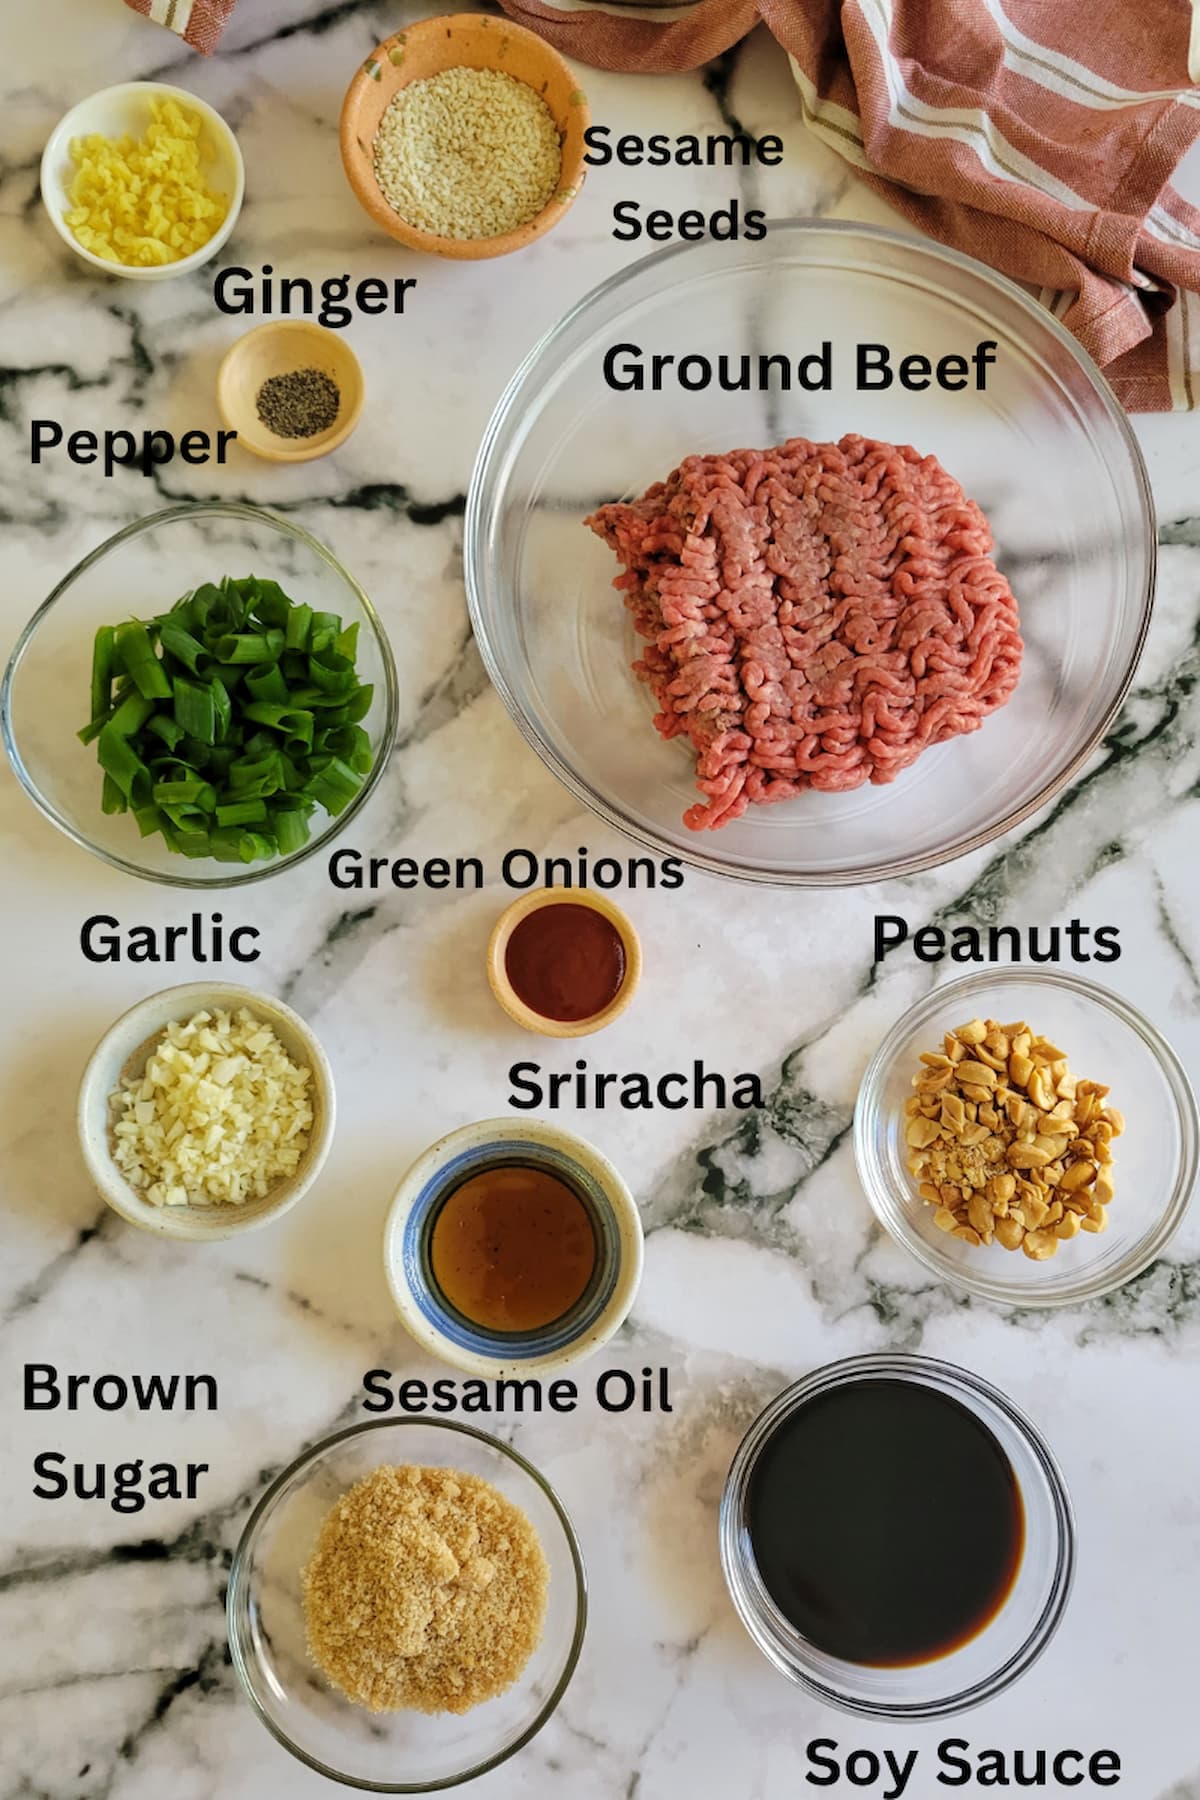 ingredients for ground beef with rice - ground beef, garlic, sesame seeds, pepper, ginger, green onions, brown sugar, sriracha, peanuts, soy sauce, sesame oil